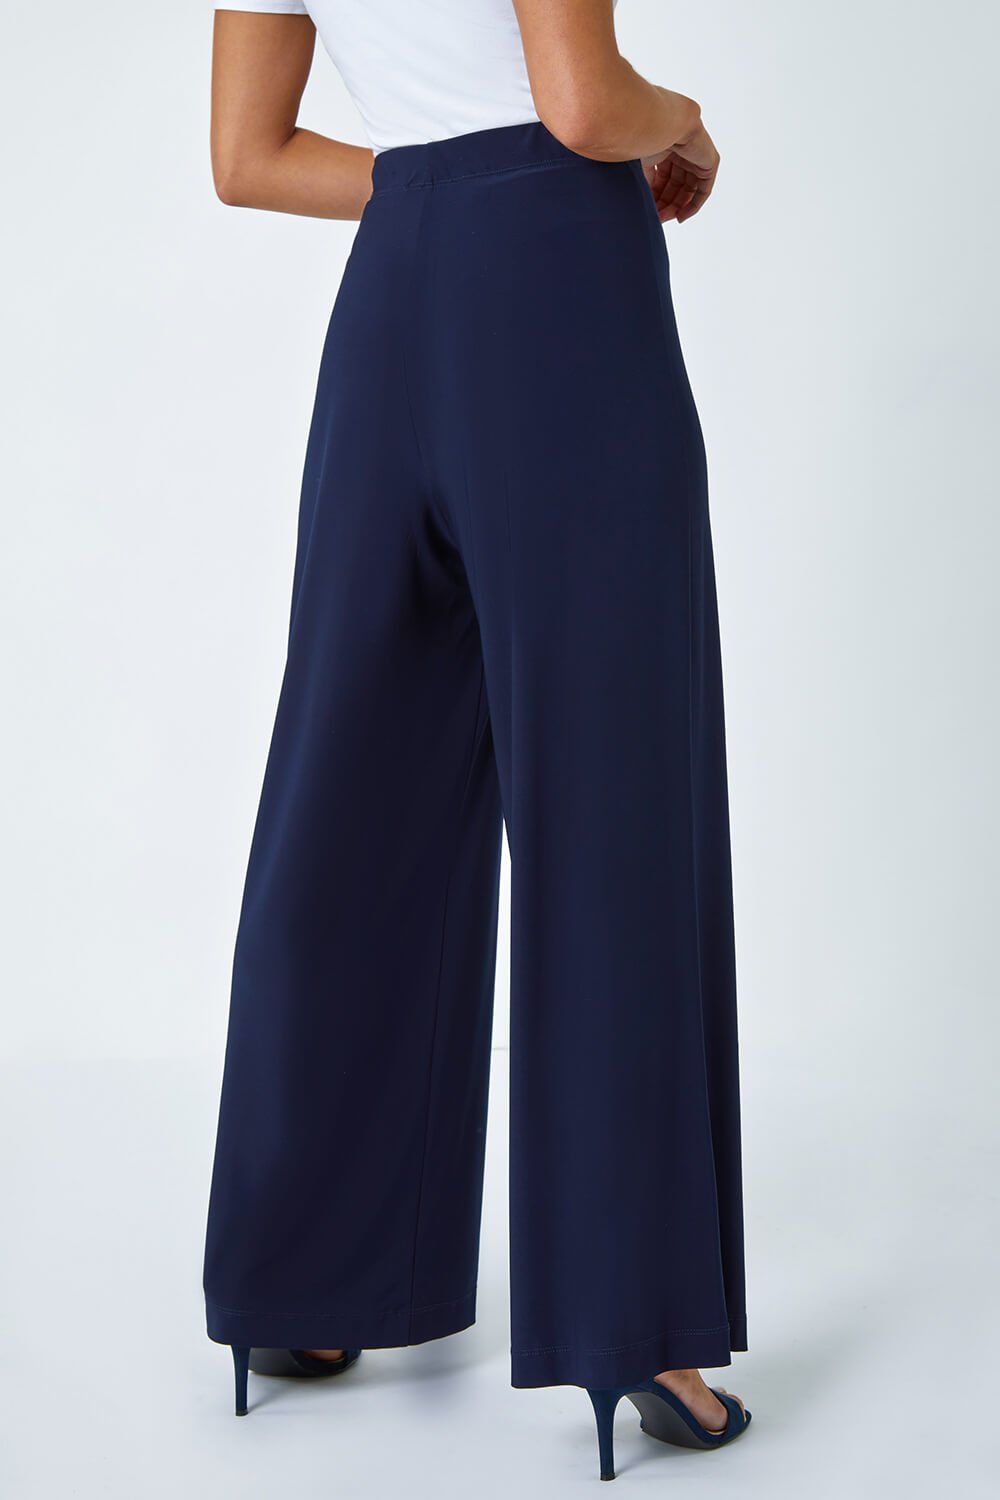  Petite Wide Leg Stretch Trouser, Image 3 of 5